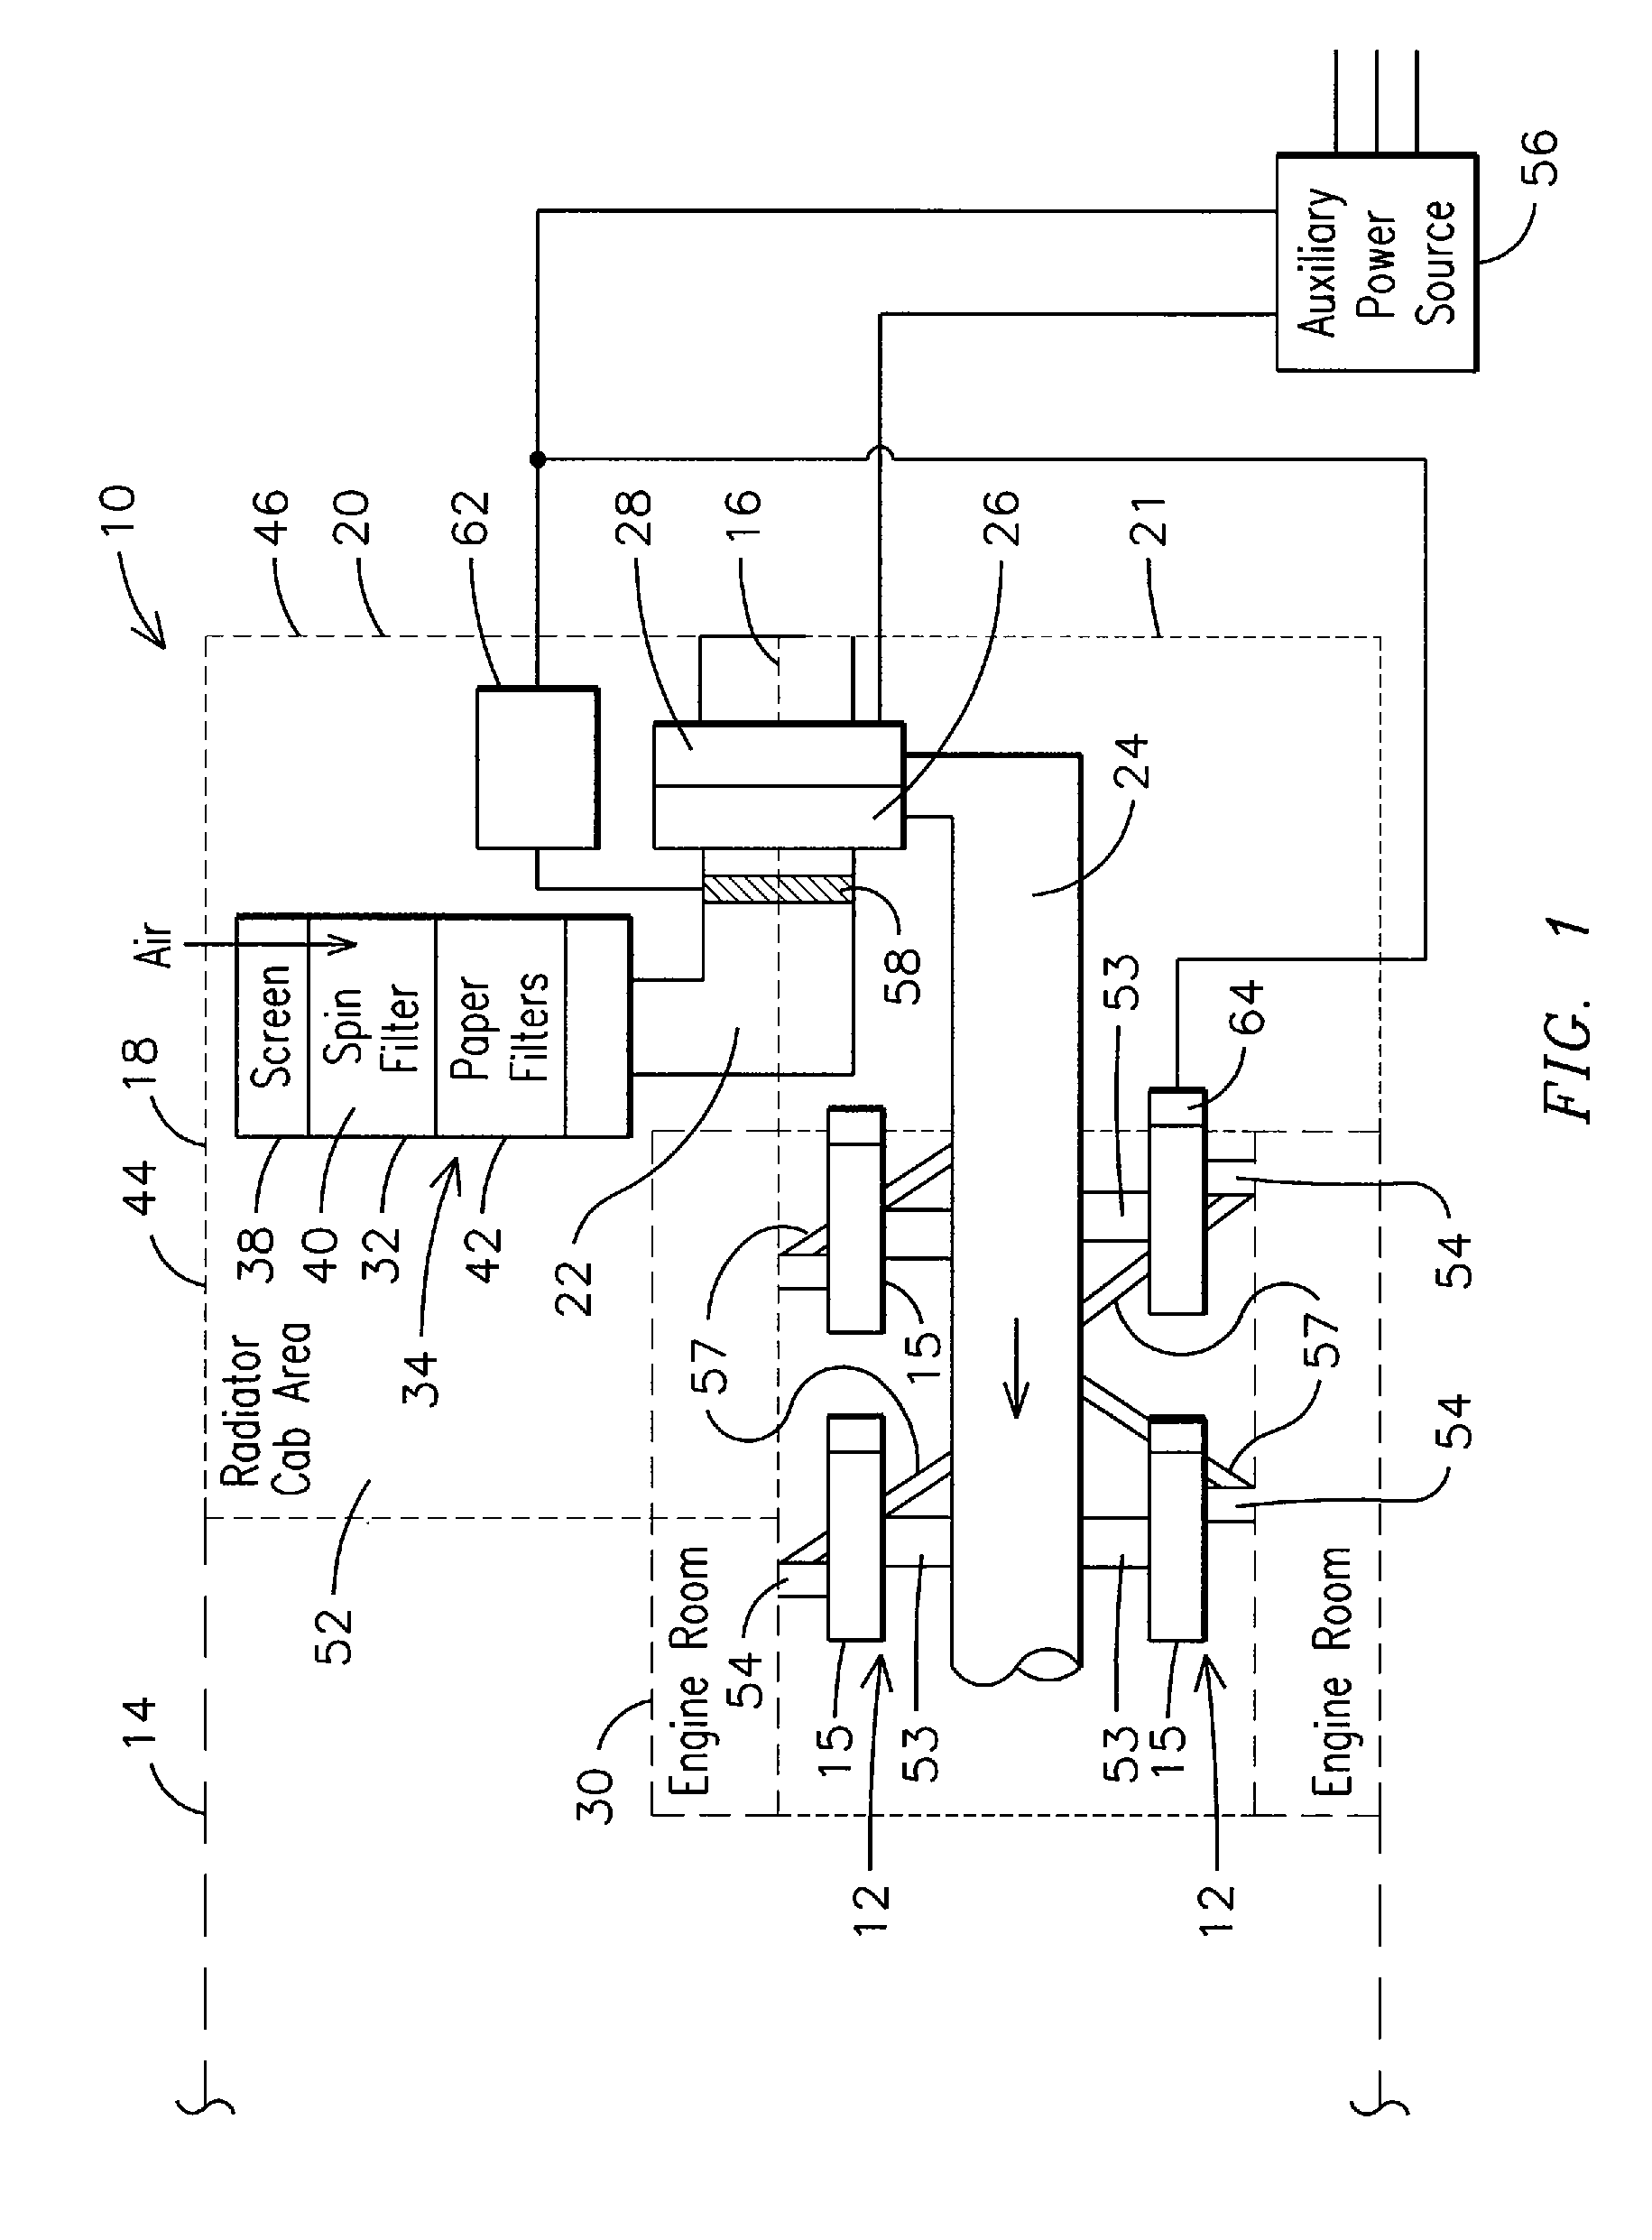 System and method for segregating an energy storage system from piping and cabling on a hybrid energy vehicle